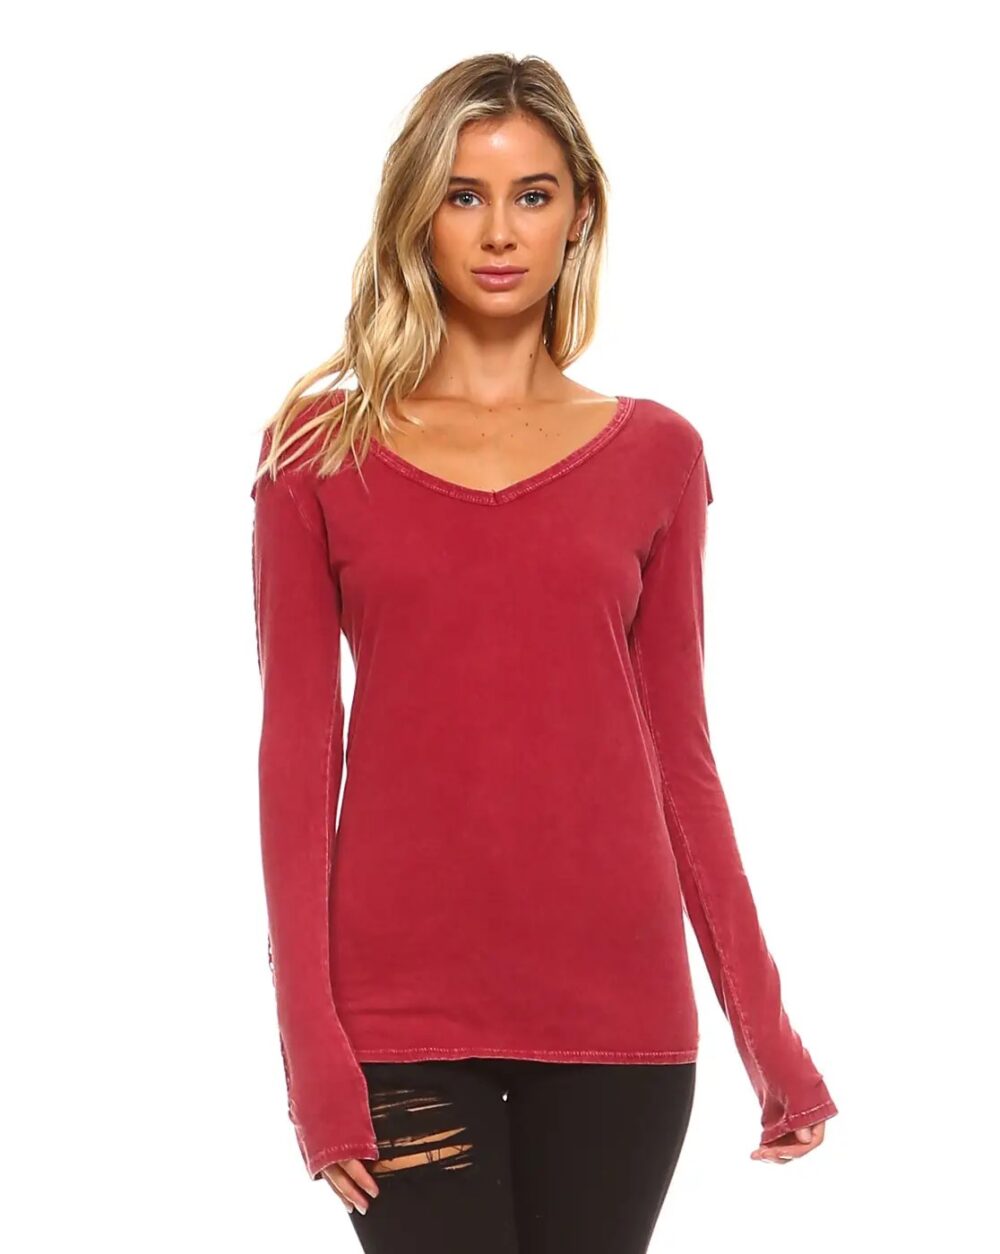 Braided Long Sleeve Mineral Washed Top Cherry Urban X Made in USA